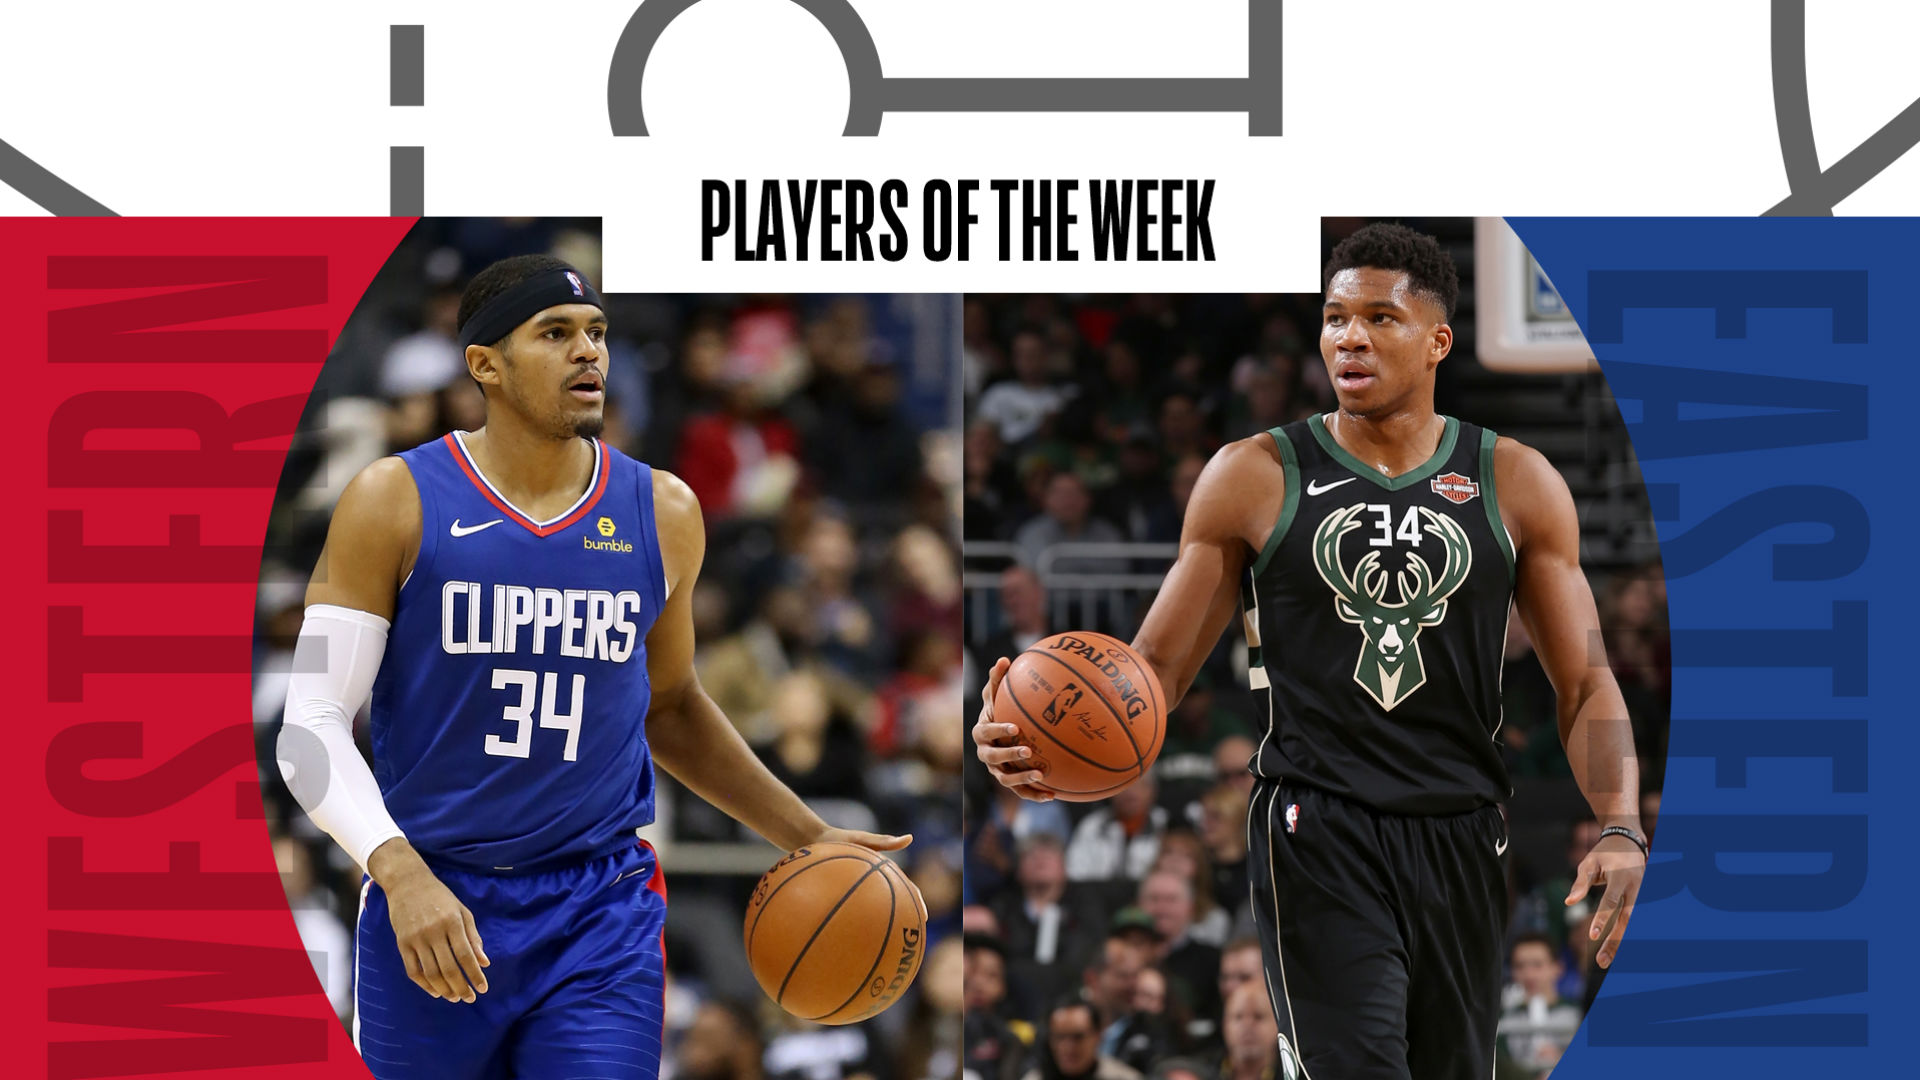 NBA Players of the Week: Bucks' Giannis Antetokounmpo and Clippers' Tobias Harris ...